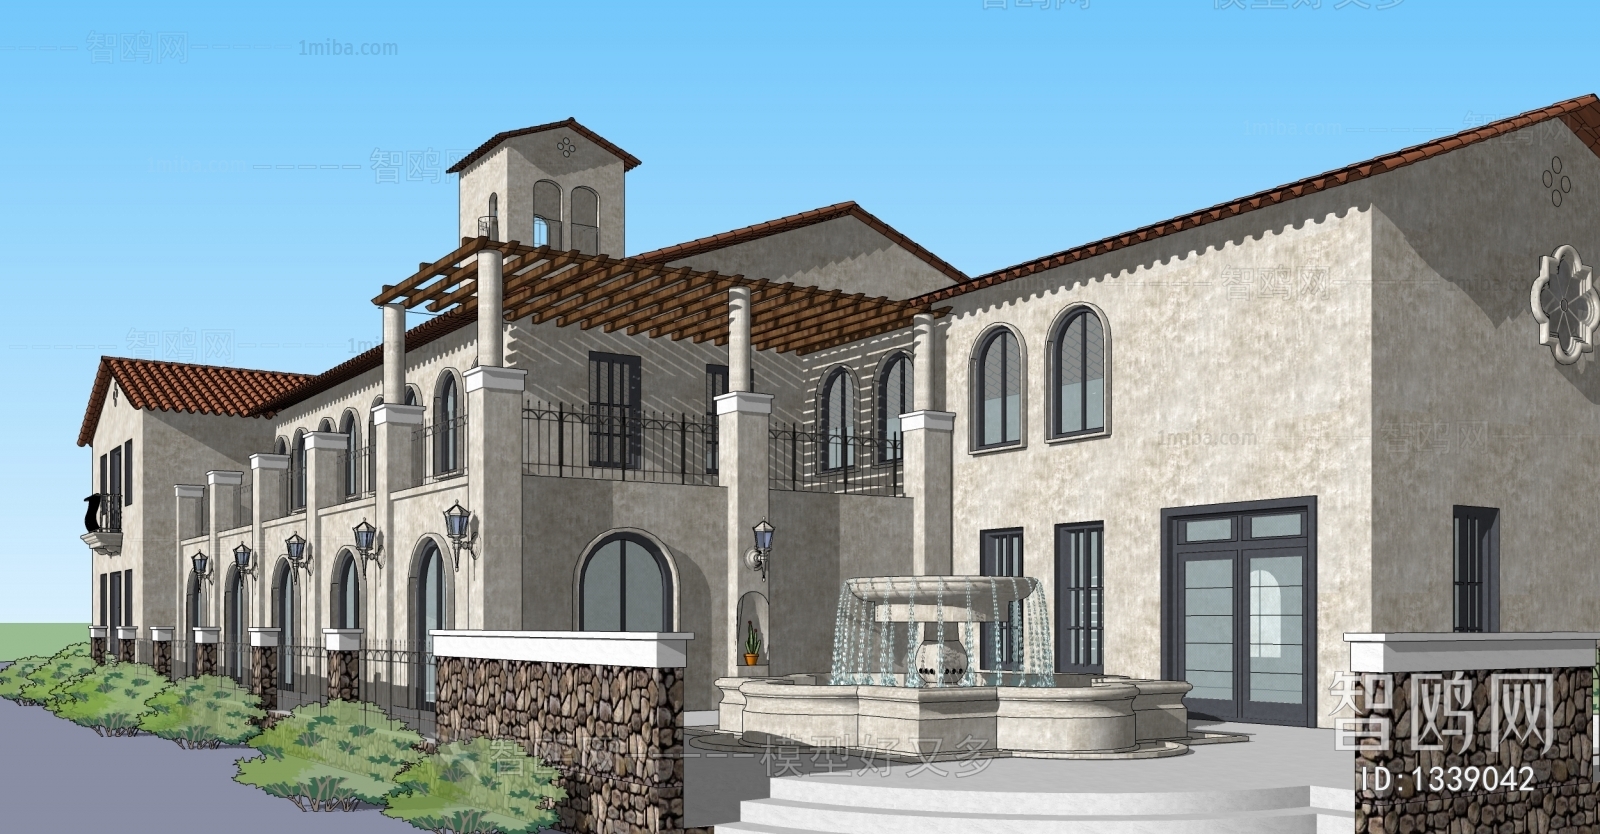 Mediterranean Style Building Appearance